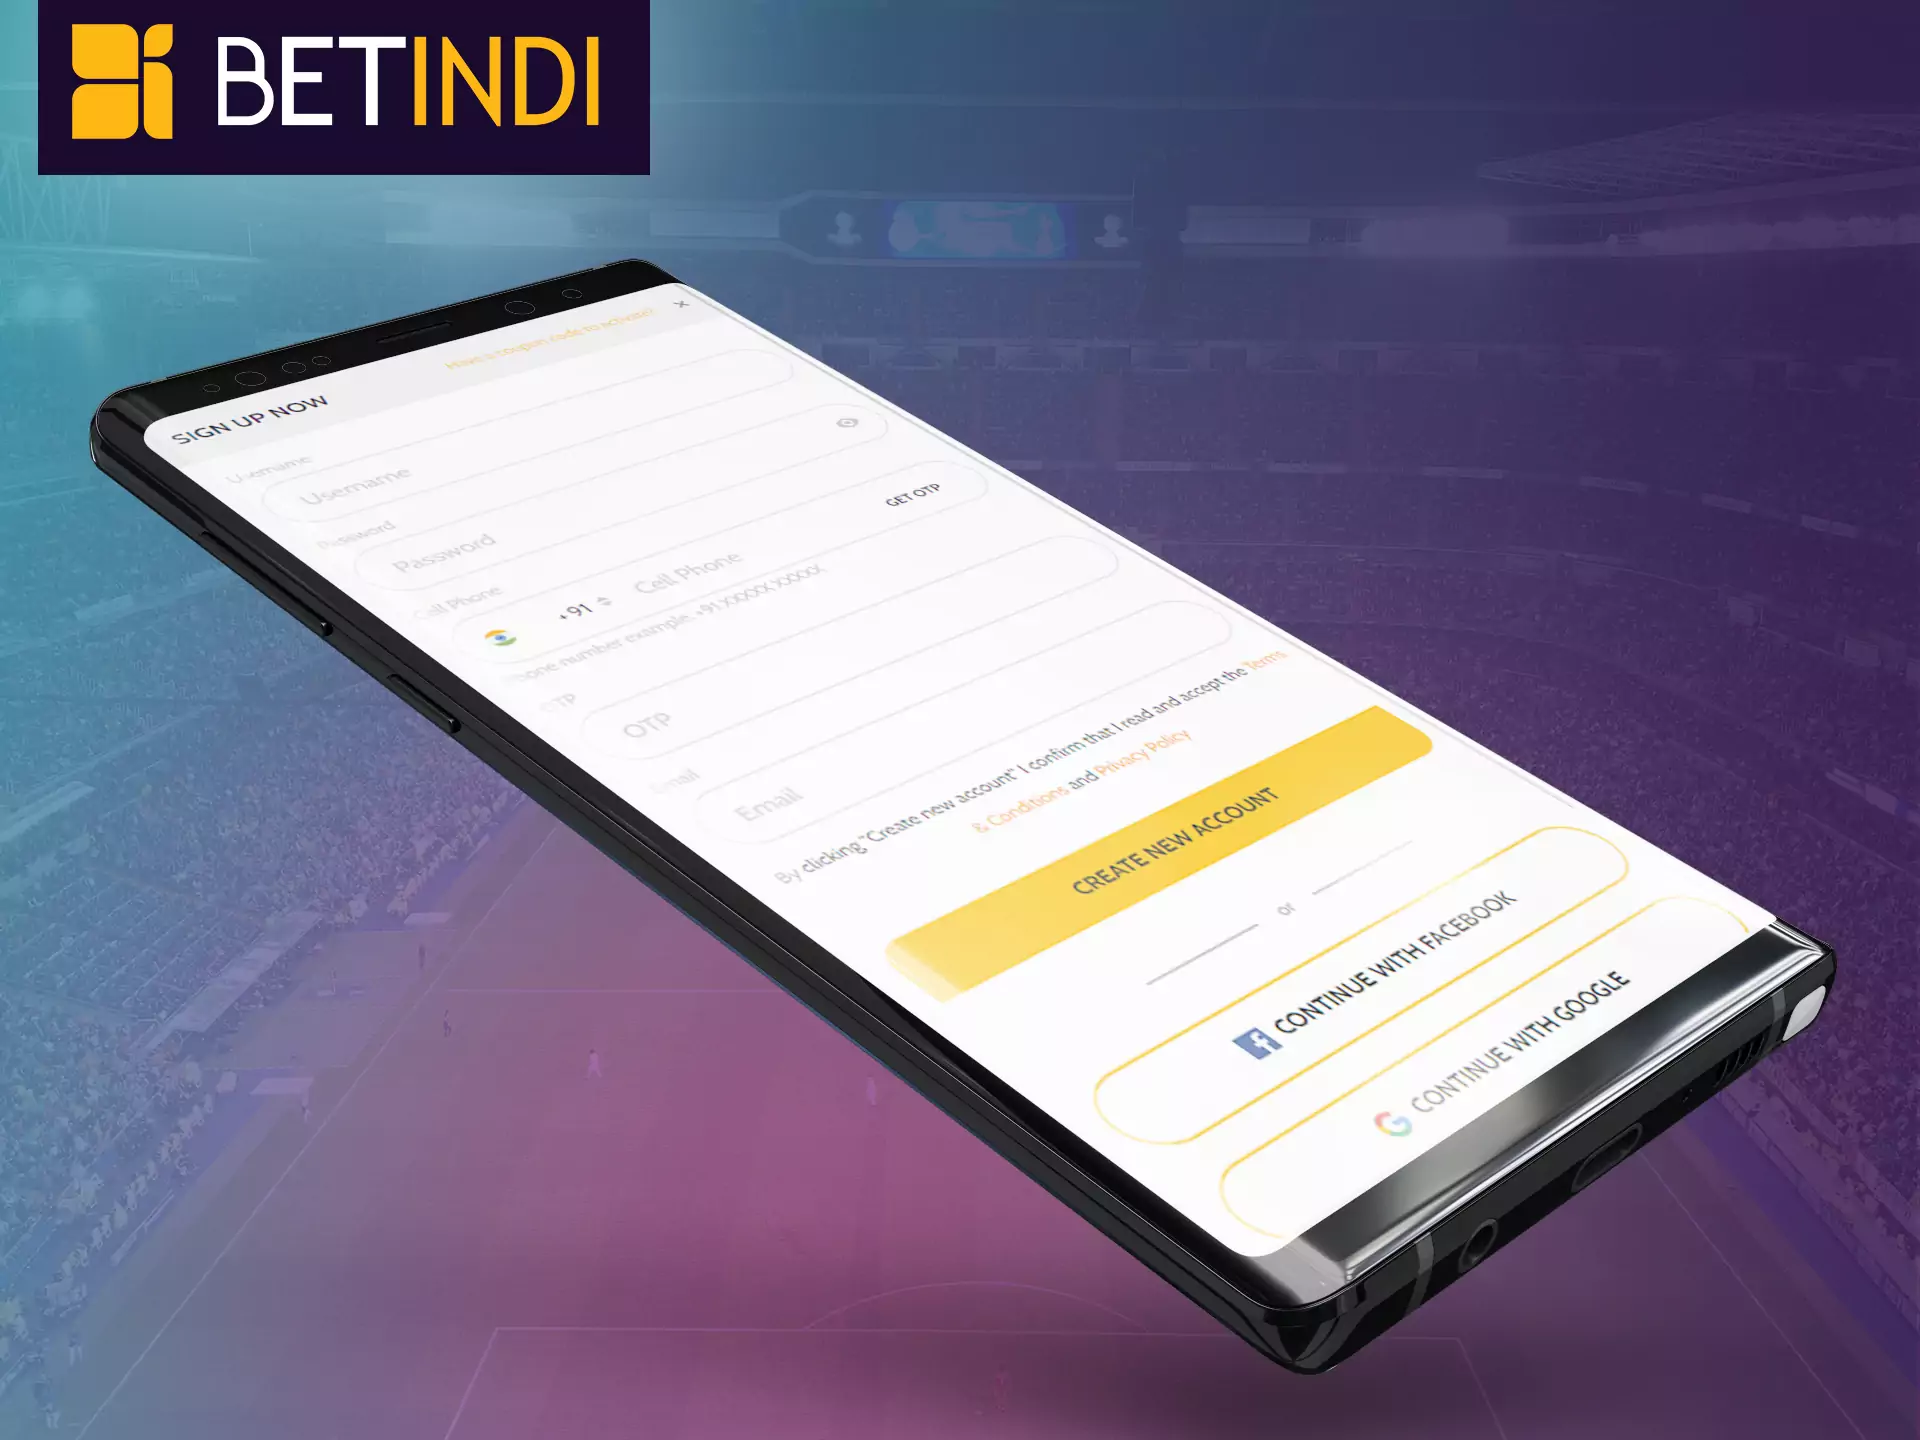 Register on Betindi it's simple and fast.